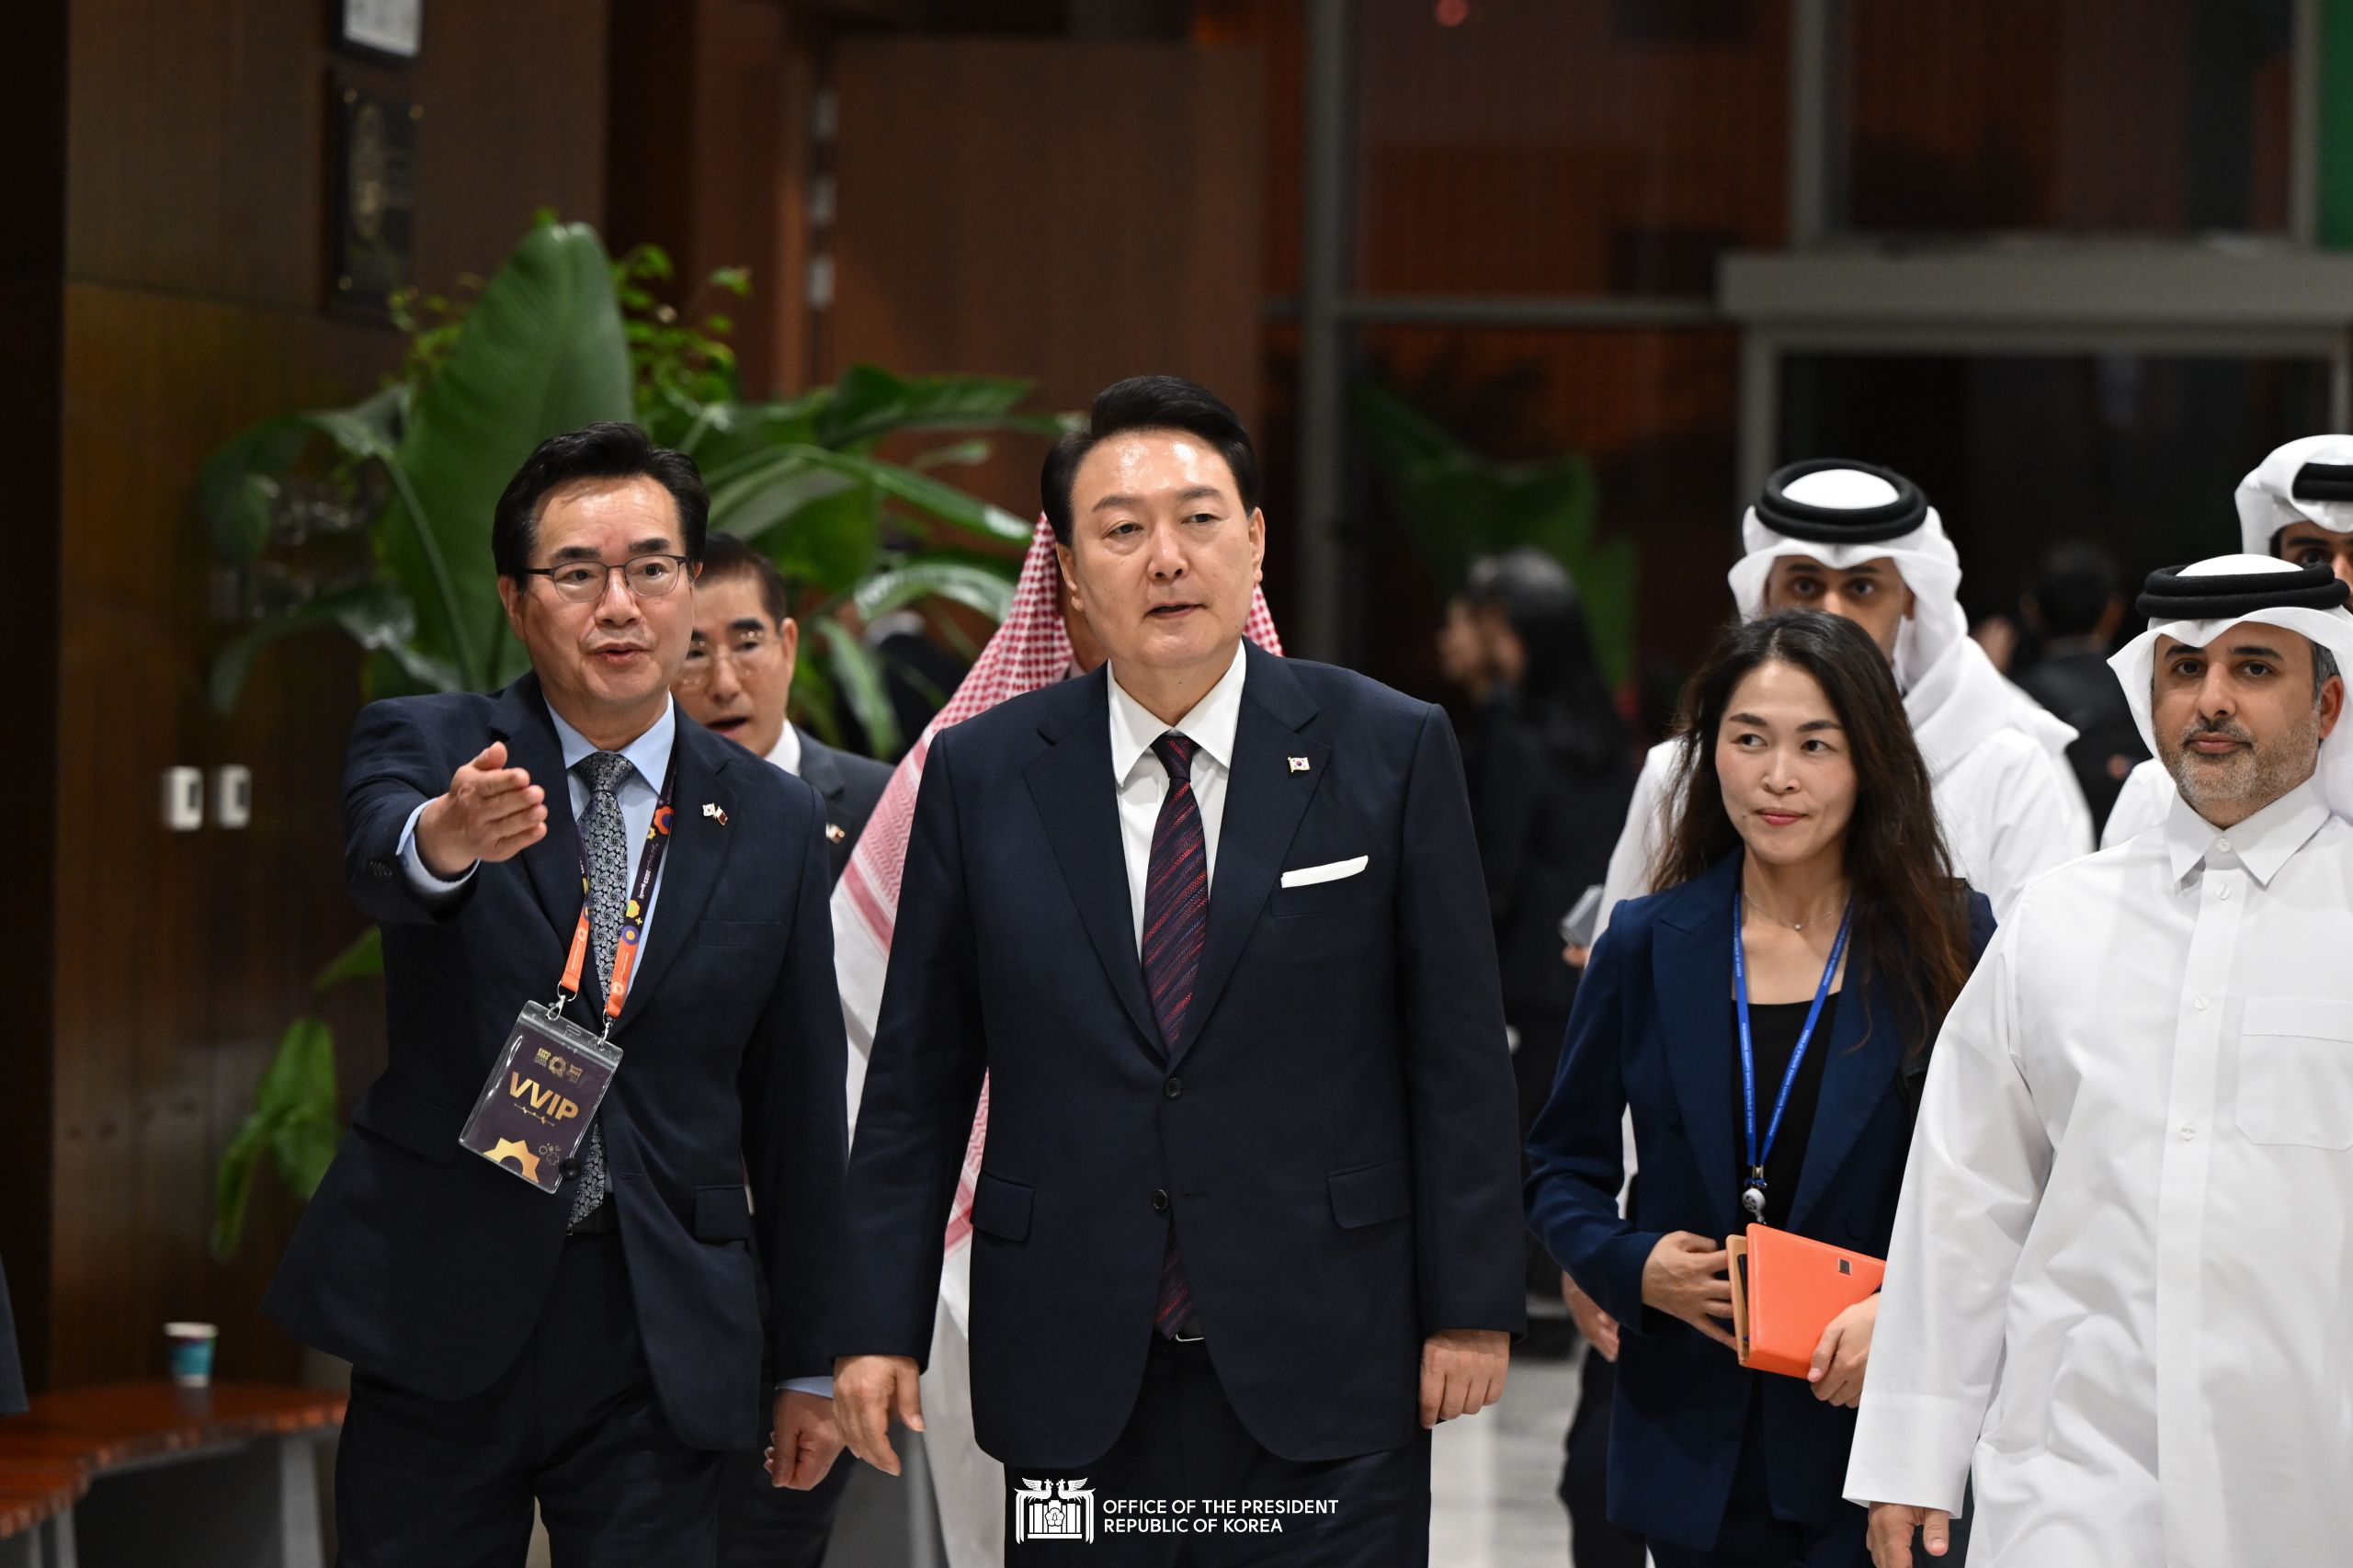 Opening ceremony for the Korean pavilion at International Horticultural Expo 2023 Doha slide 1